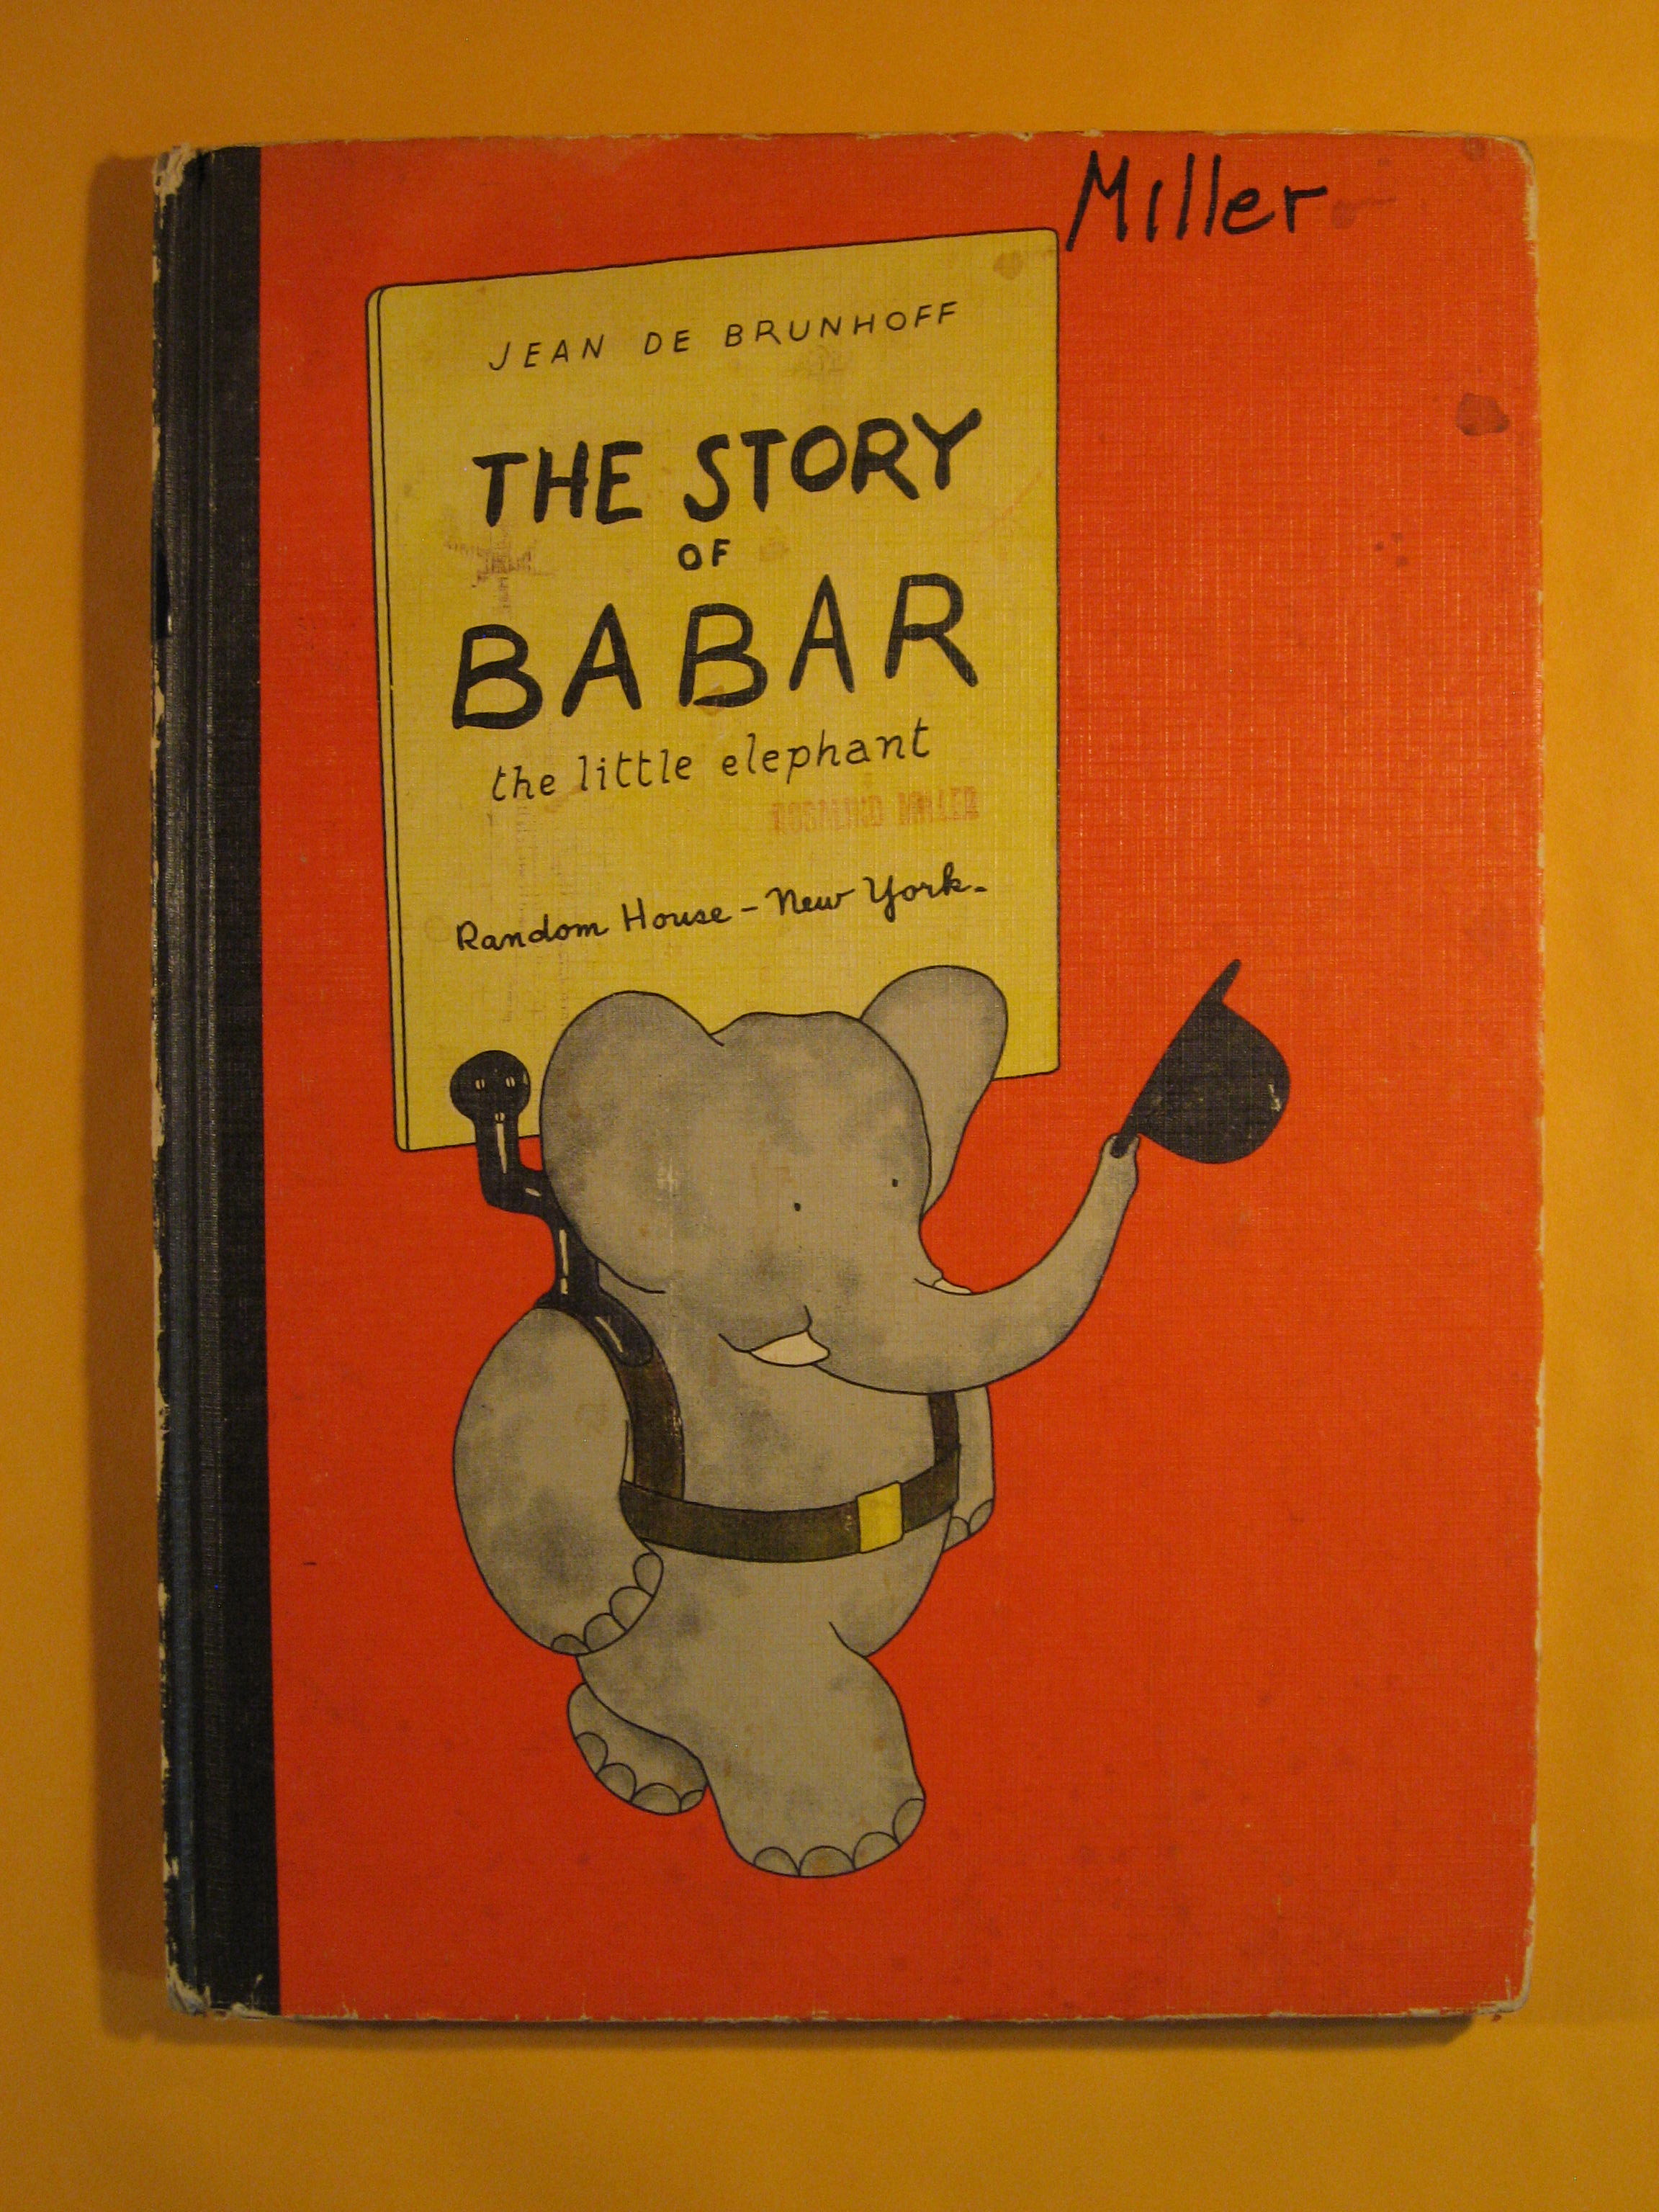 Story　Little　the　Babar　of　The　Elephant